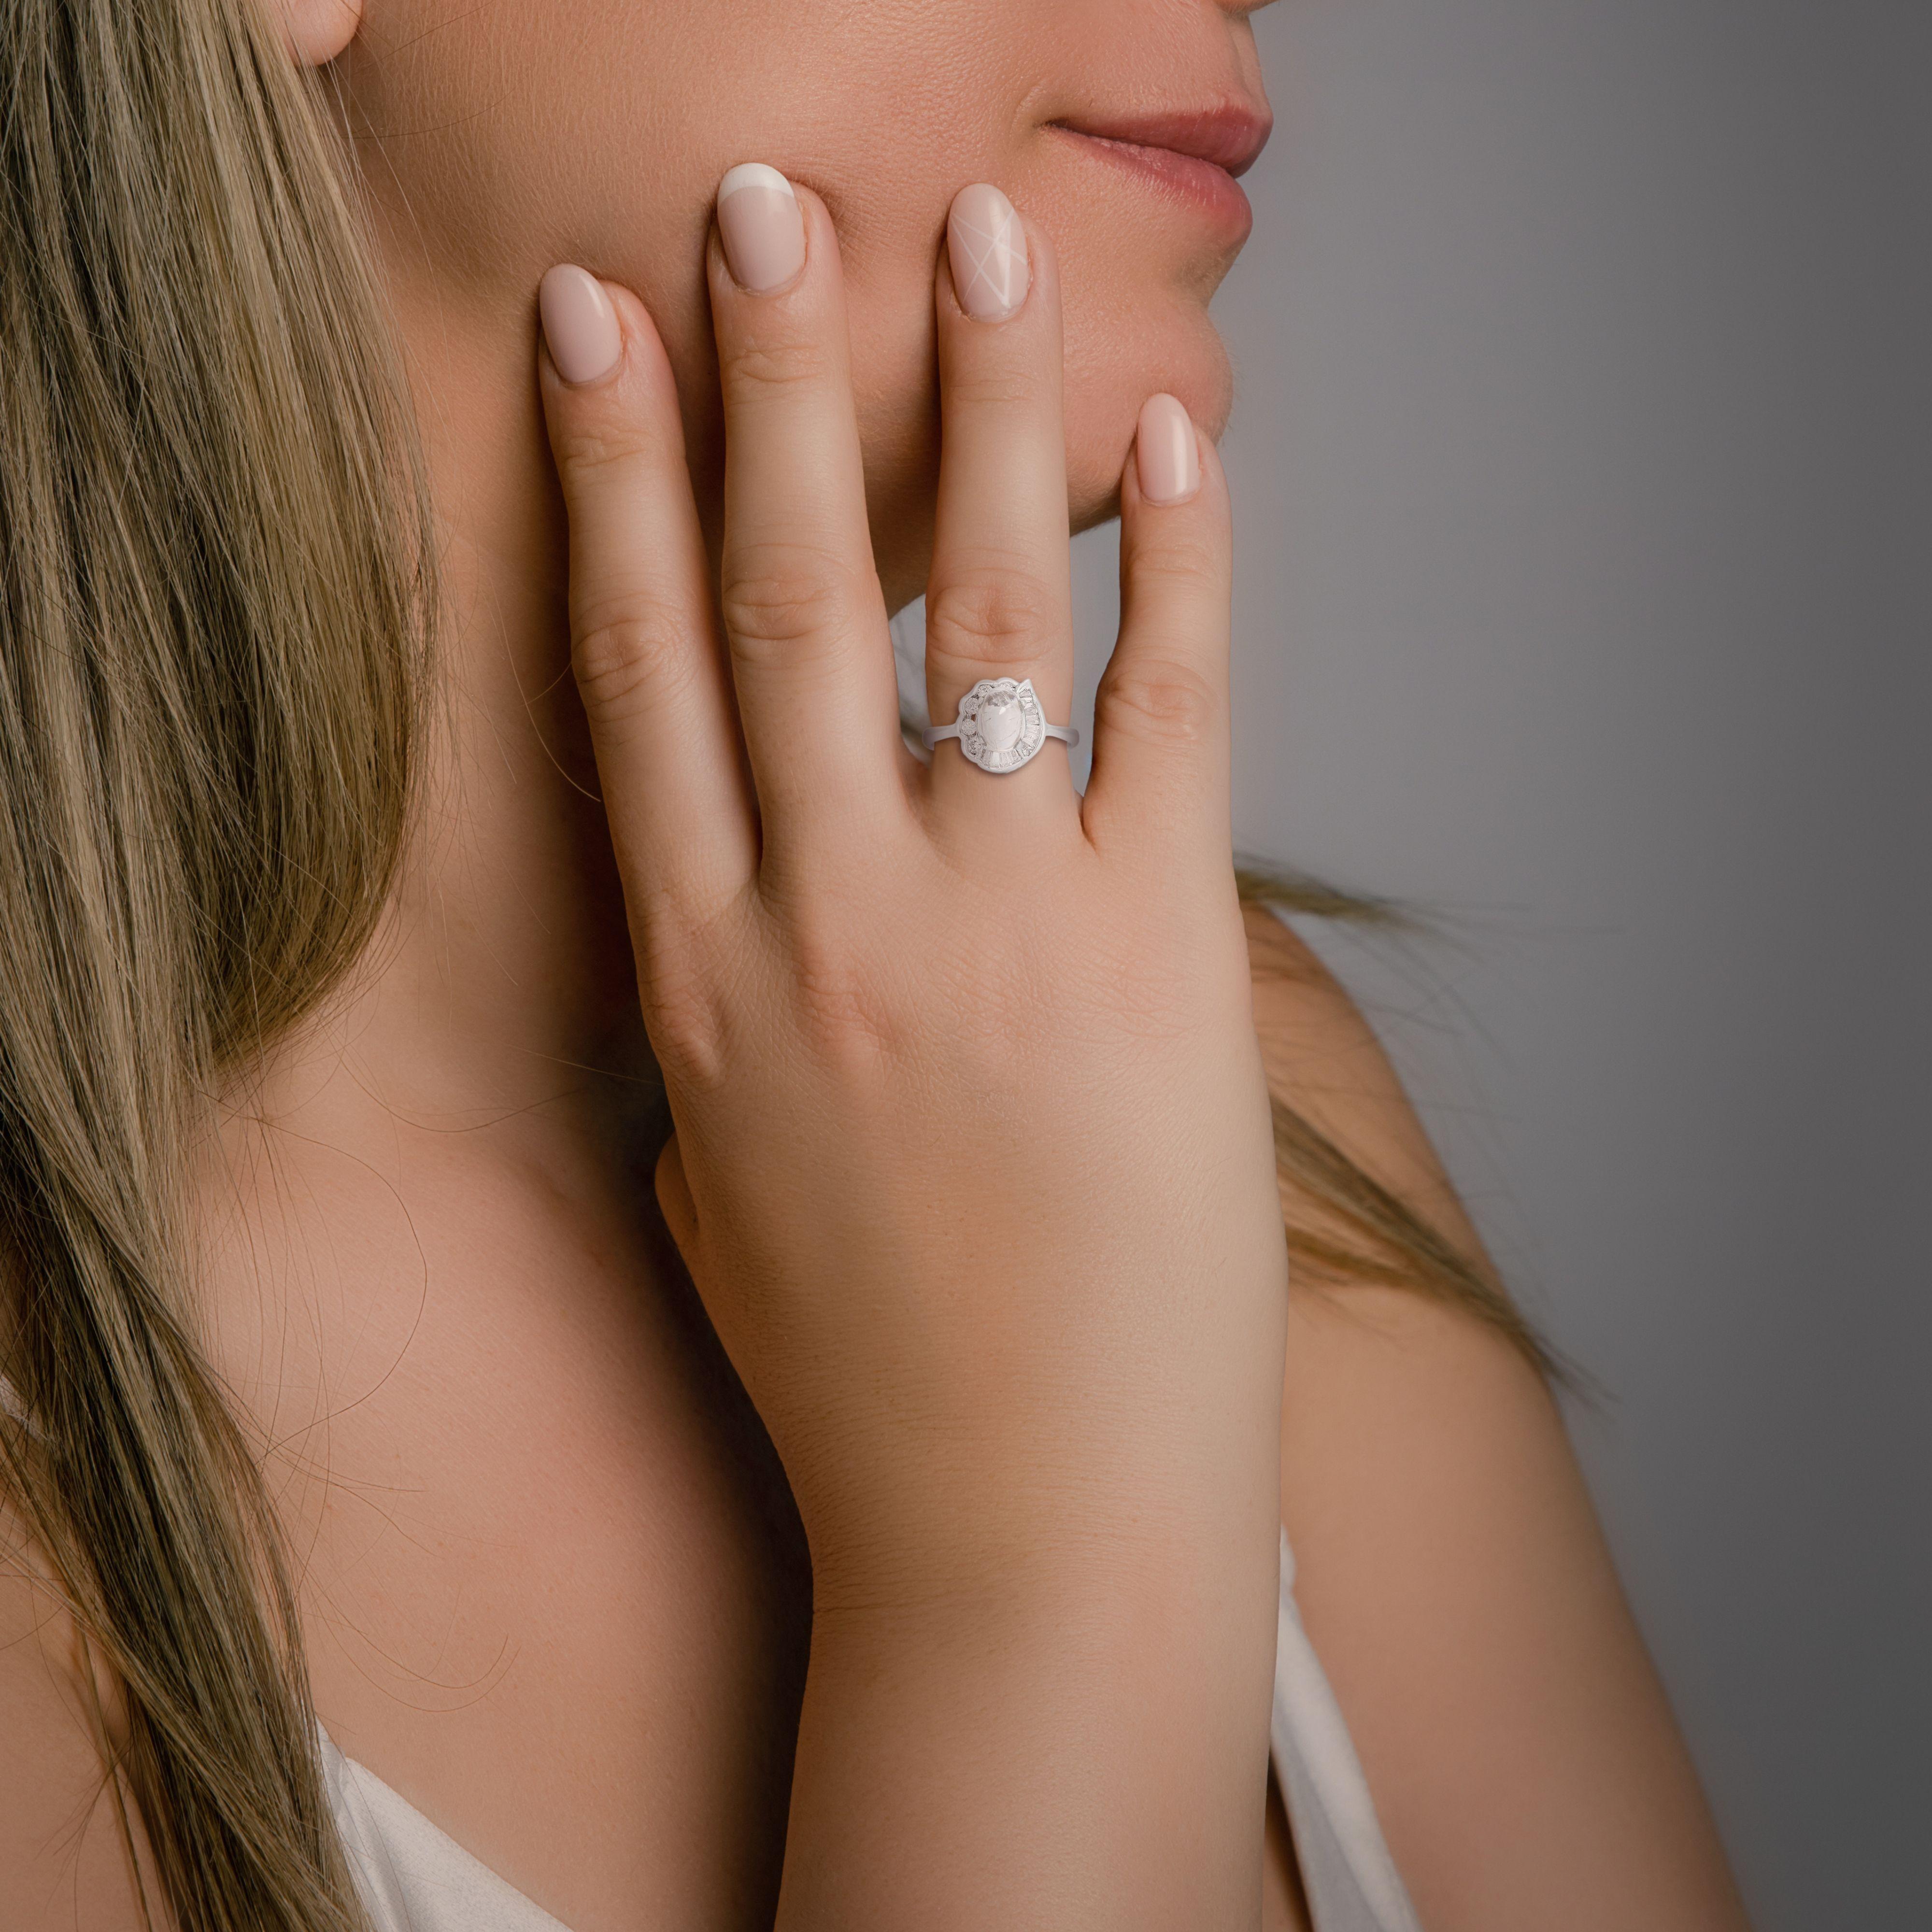 This enchanting ring, masterfully crafted in 14K white gold, is a stunning amalgamation of ethereal beauty and sparkling elegance. The centerpiece is a captivating moonstone, weighing 0.60 carats, renowned for its mesmerizing play of light and